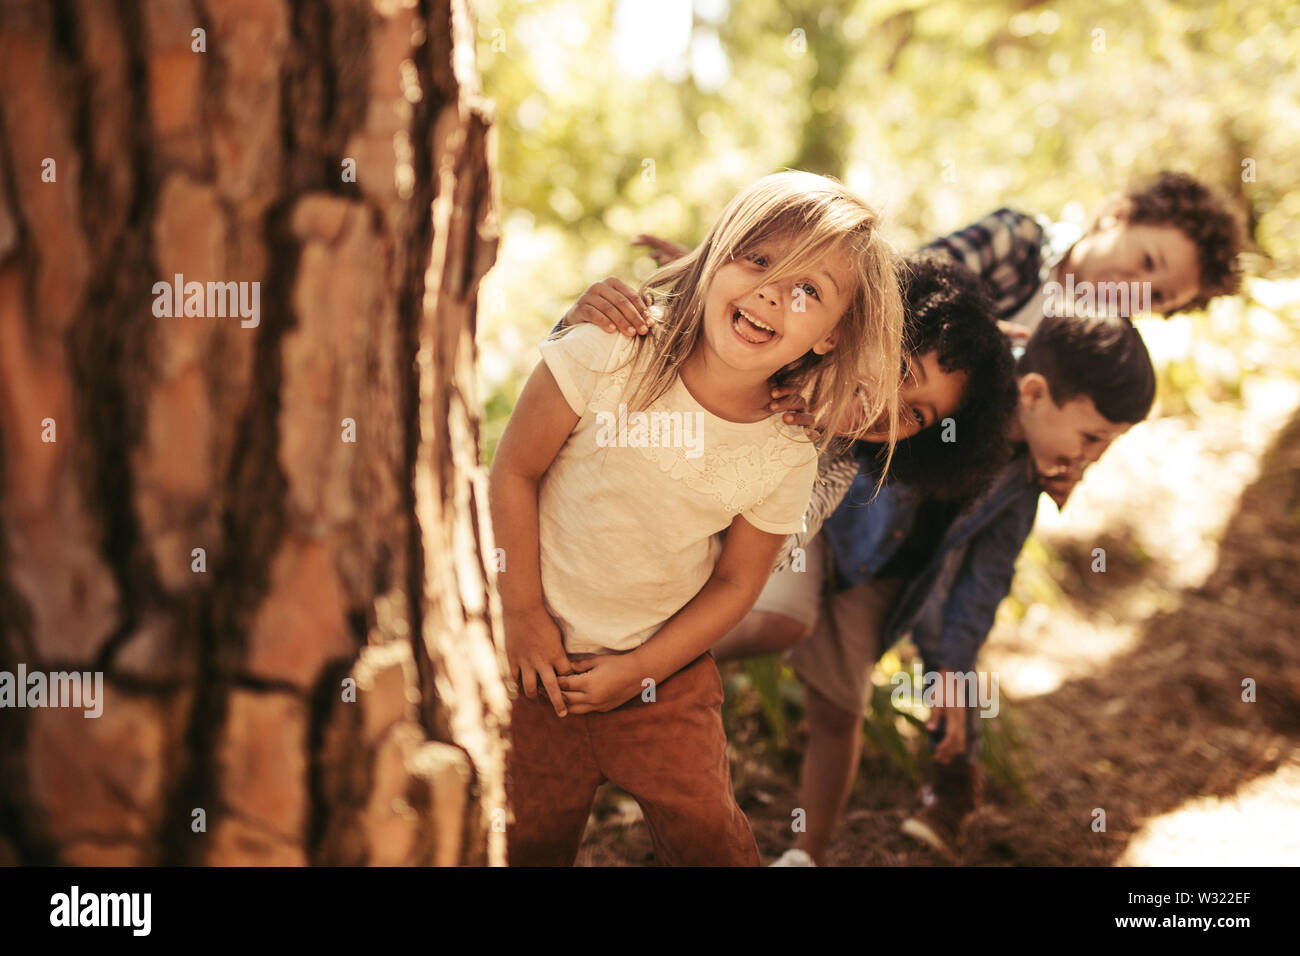 Group of kids standing in row and peeking behind a tree outdoors. Children playing hide and seek in a park. Stock Photo